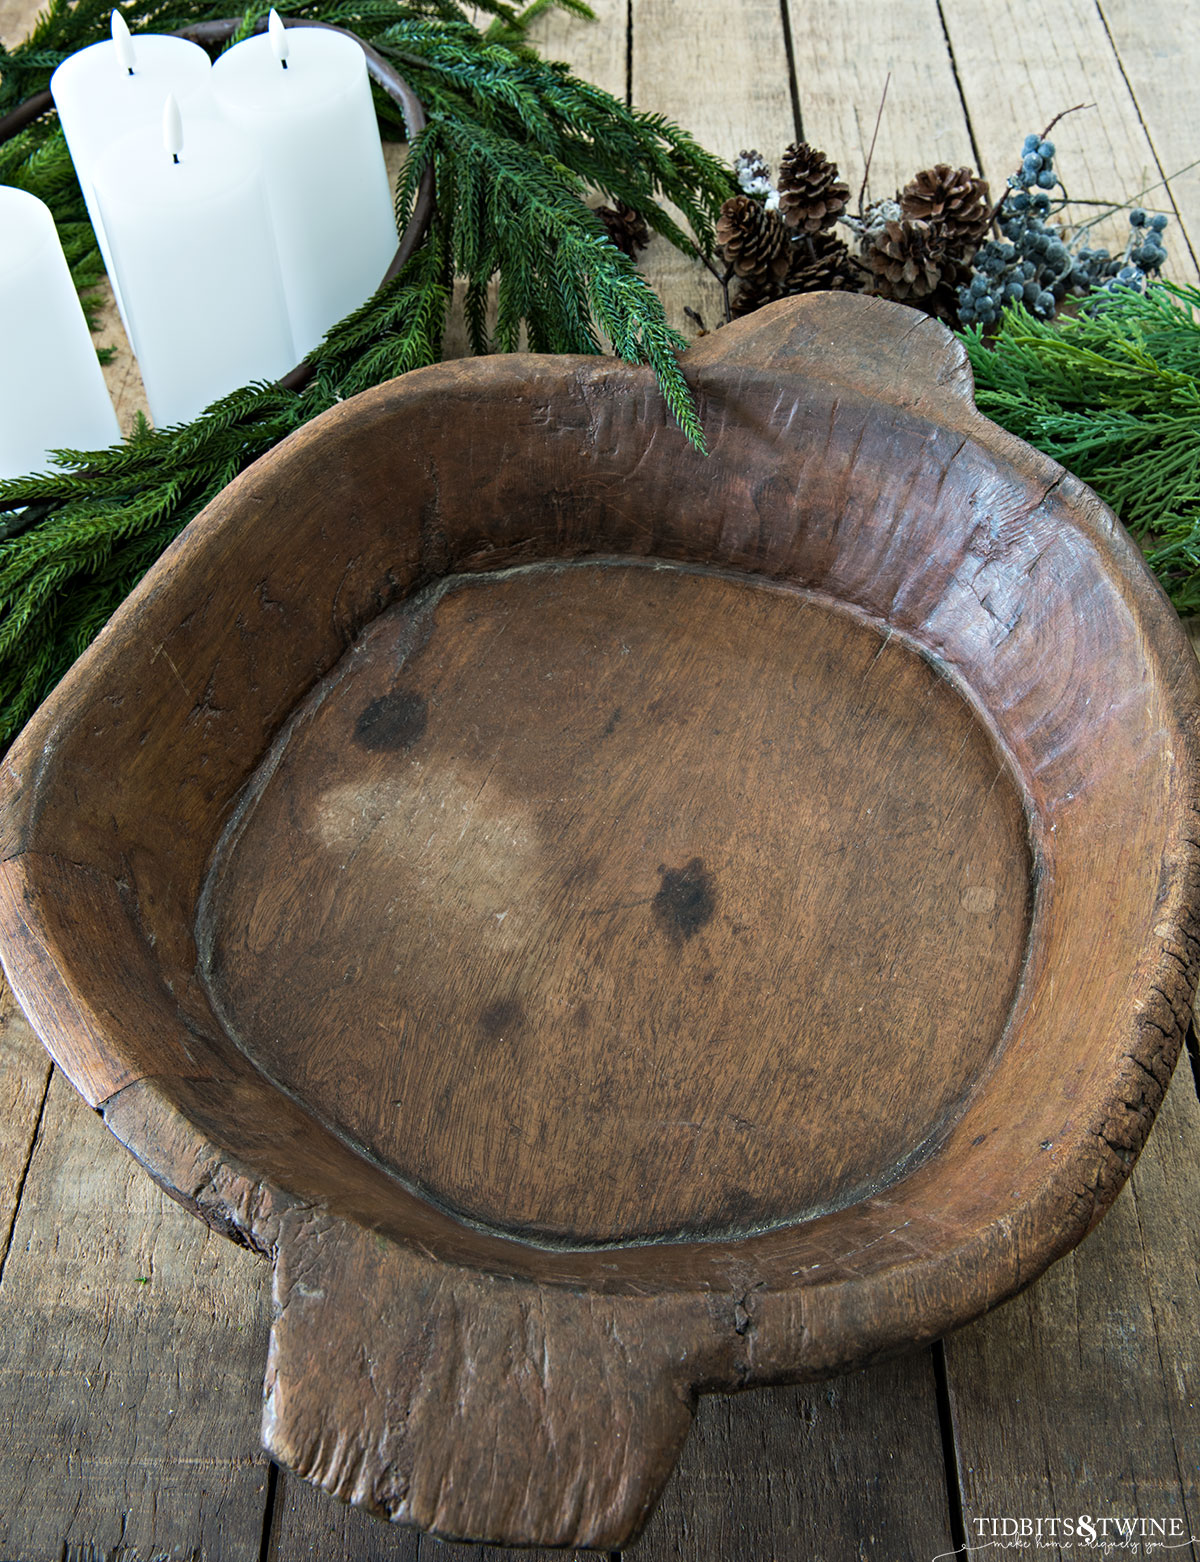 brown rustic shallow round dough bowl on table with norfolk pine garland and candles in background